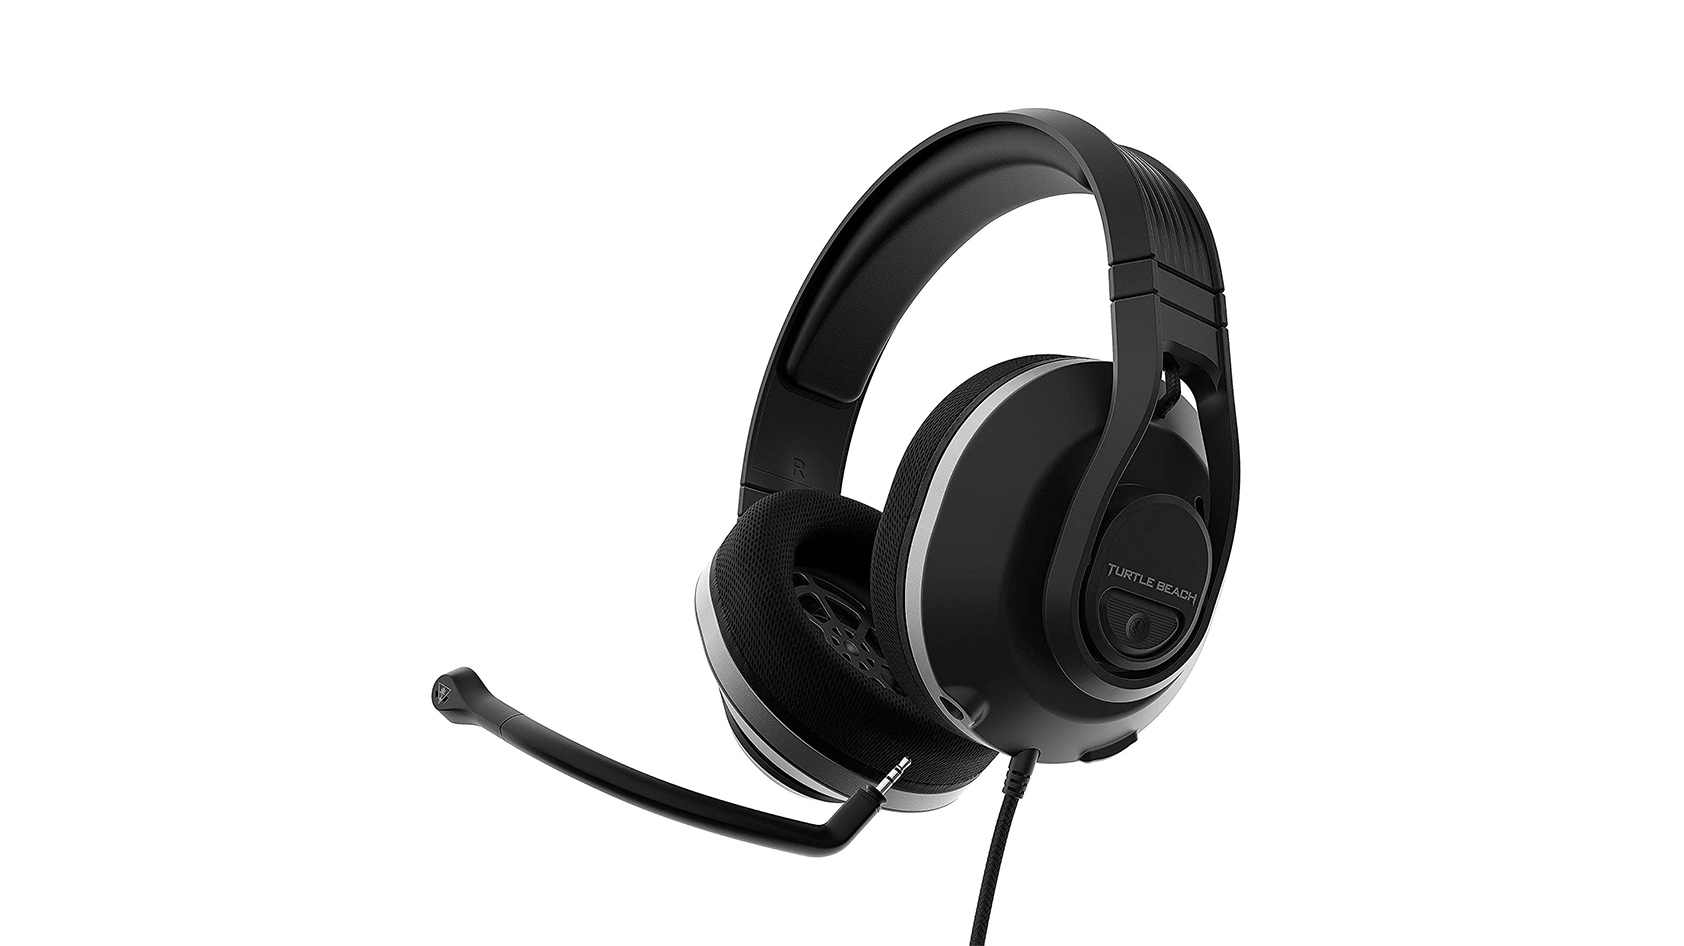 Turtle Beach Recon 500 gaming headset against a white background.